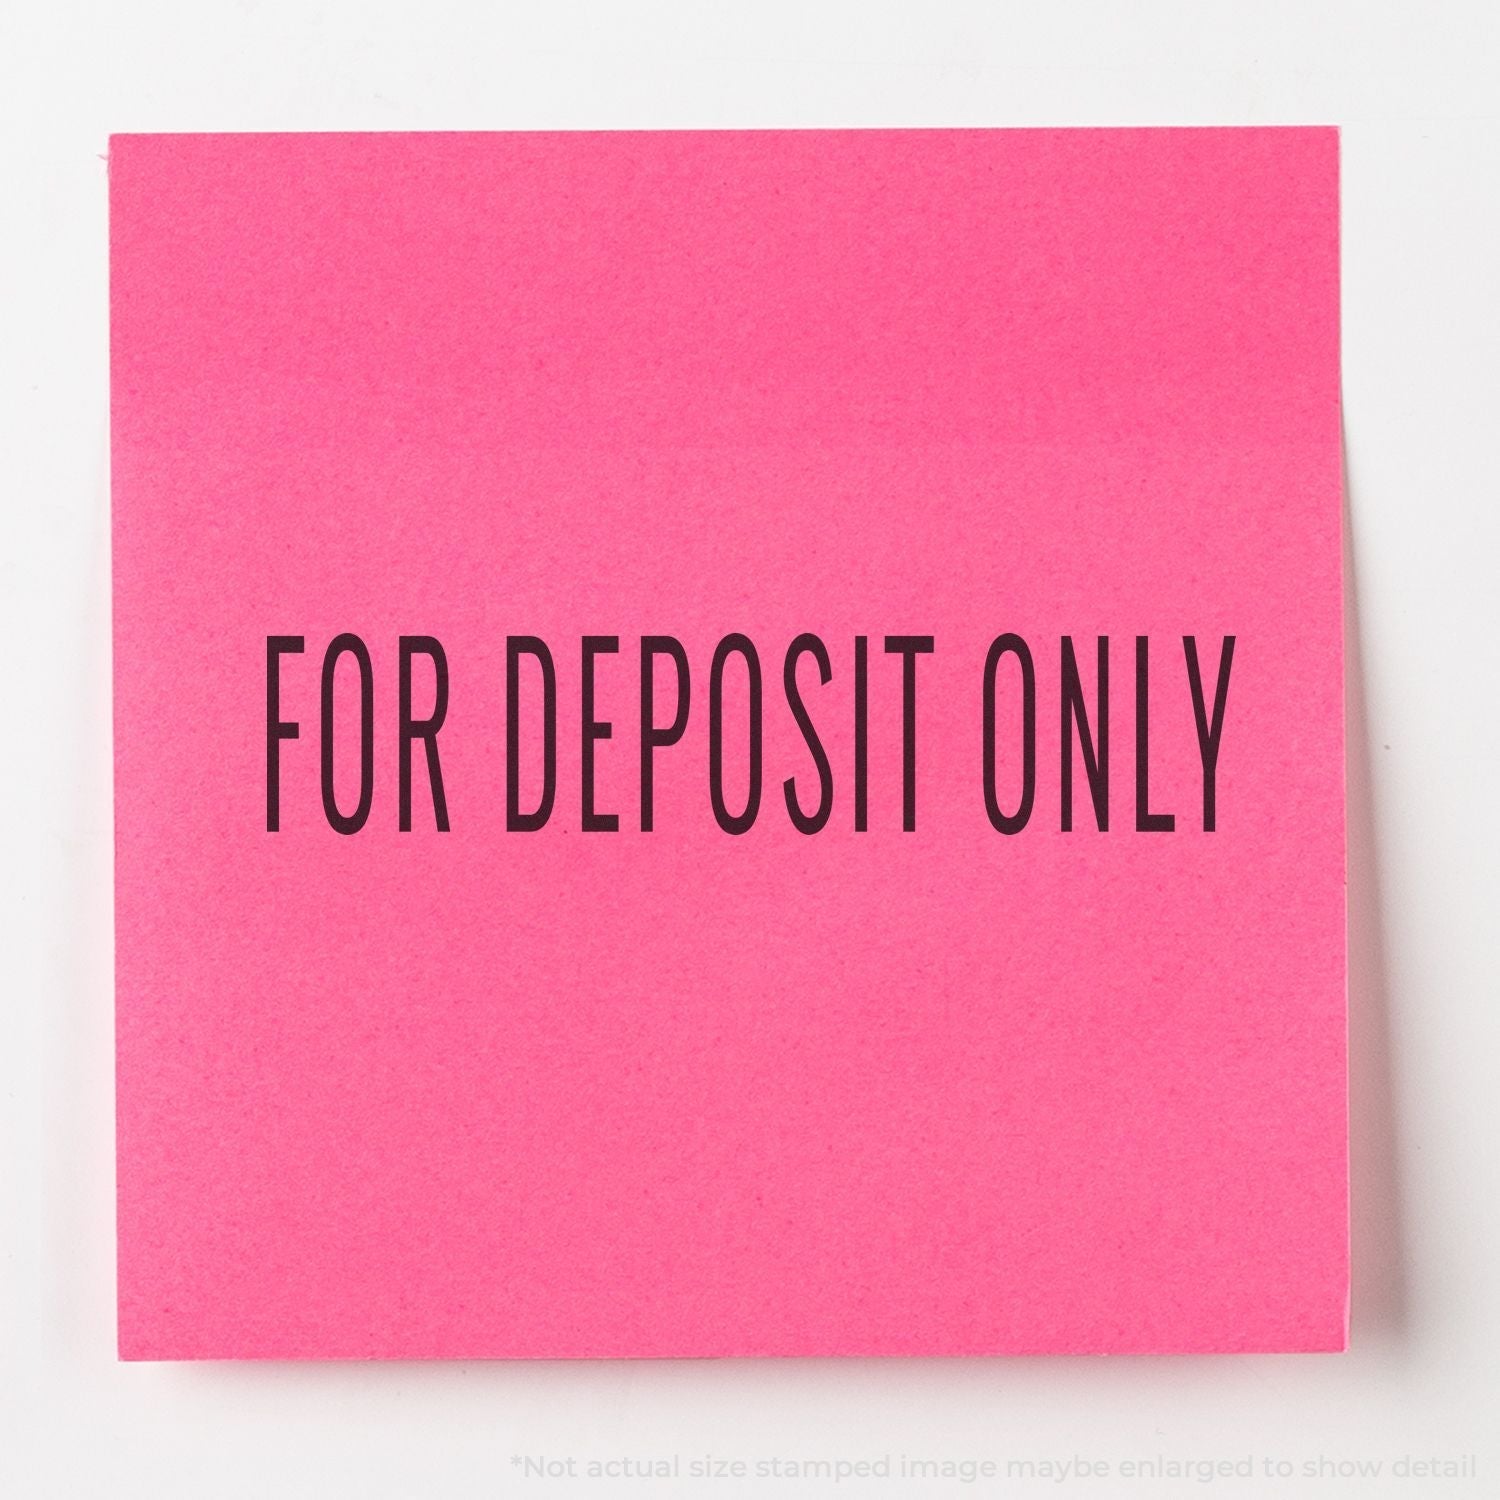 A self-inking stamp with a stamped image showing how the text "FOR DEPOSIT ONLY" in a narrow font is displayed after stamping.